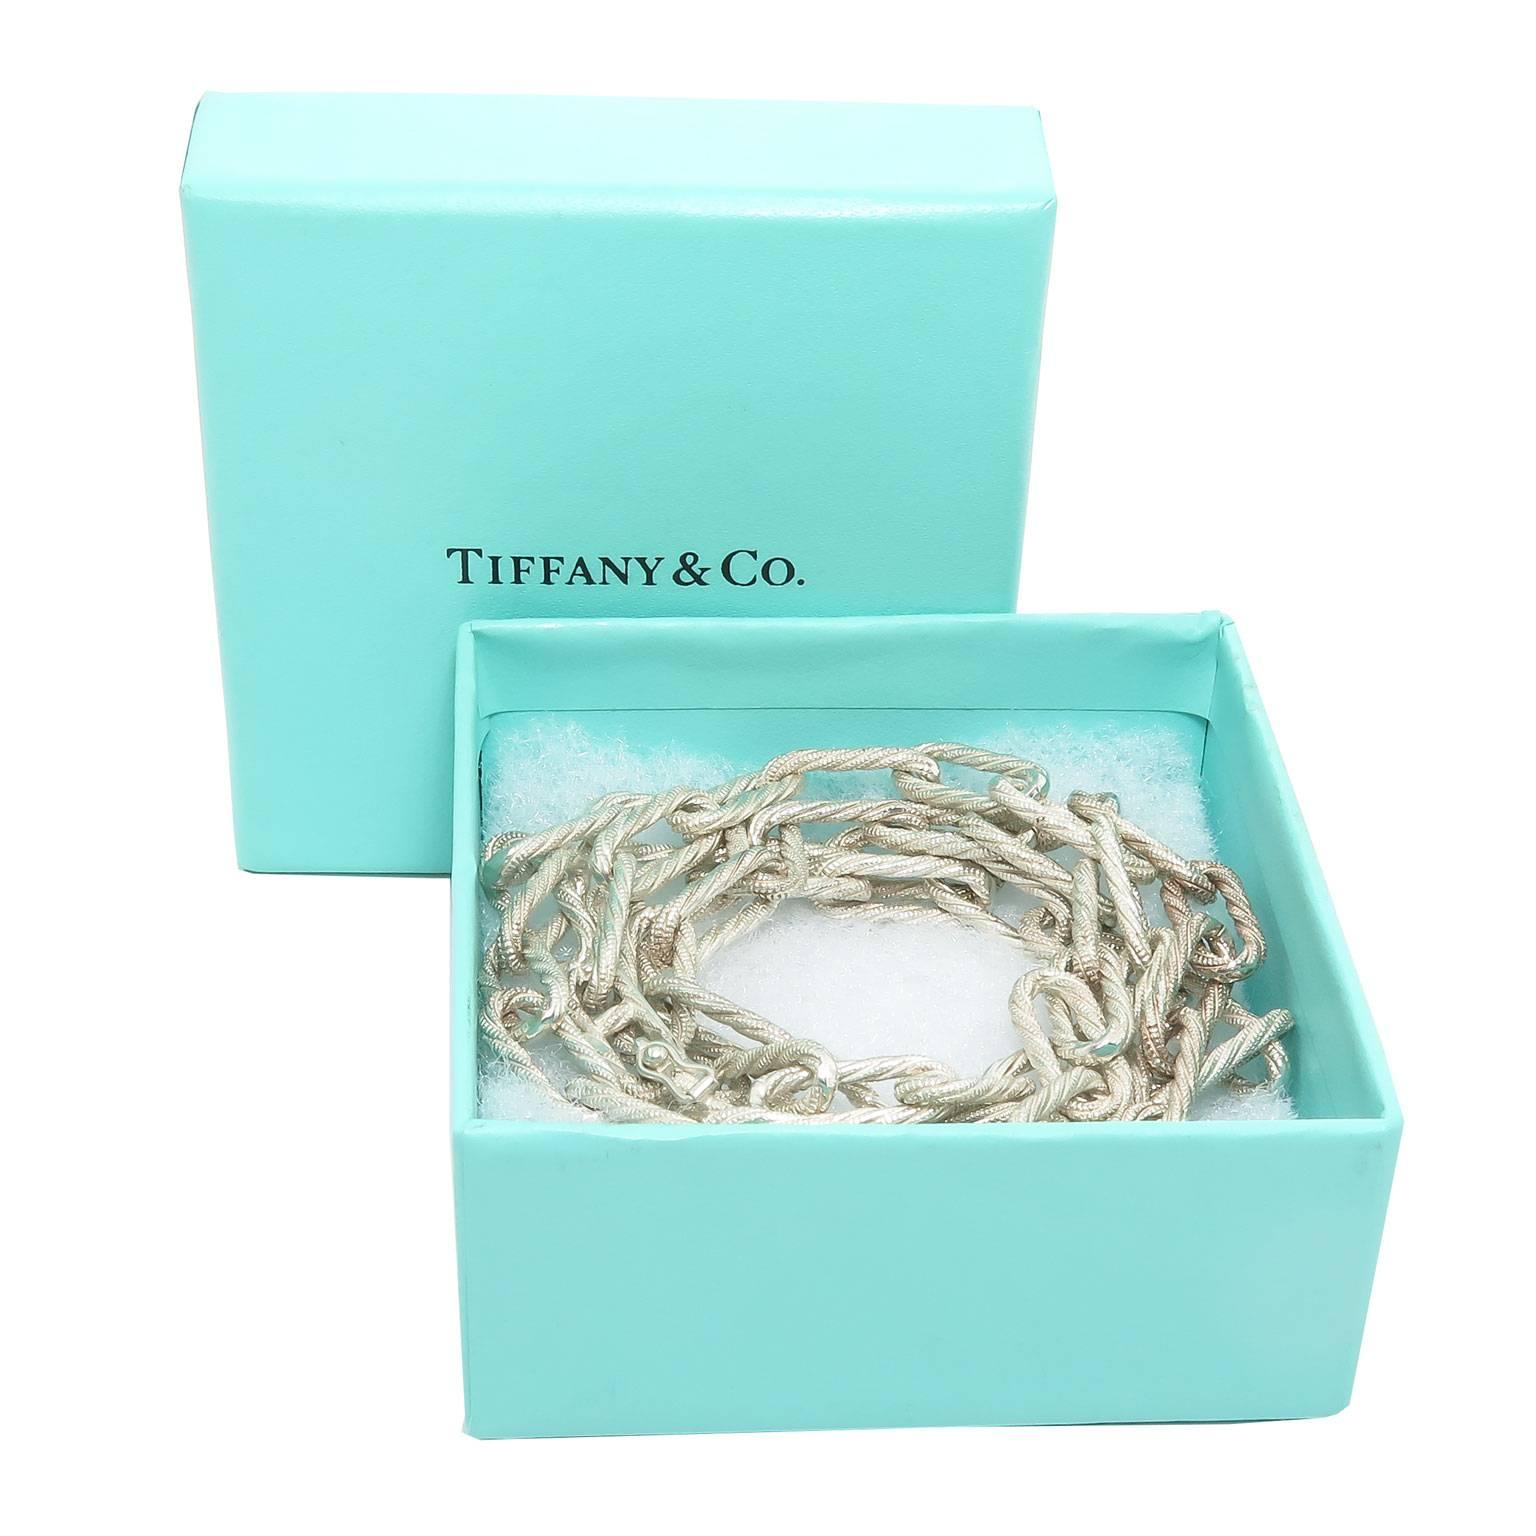 Circa 1980 Tiffany & Company Sterling Silver Chain, measuring 30 inches in length and having 1/4 inch wide textured finish links. Excellent unworn condition and comes in the original Tiffany Box.